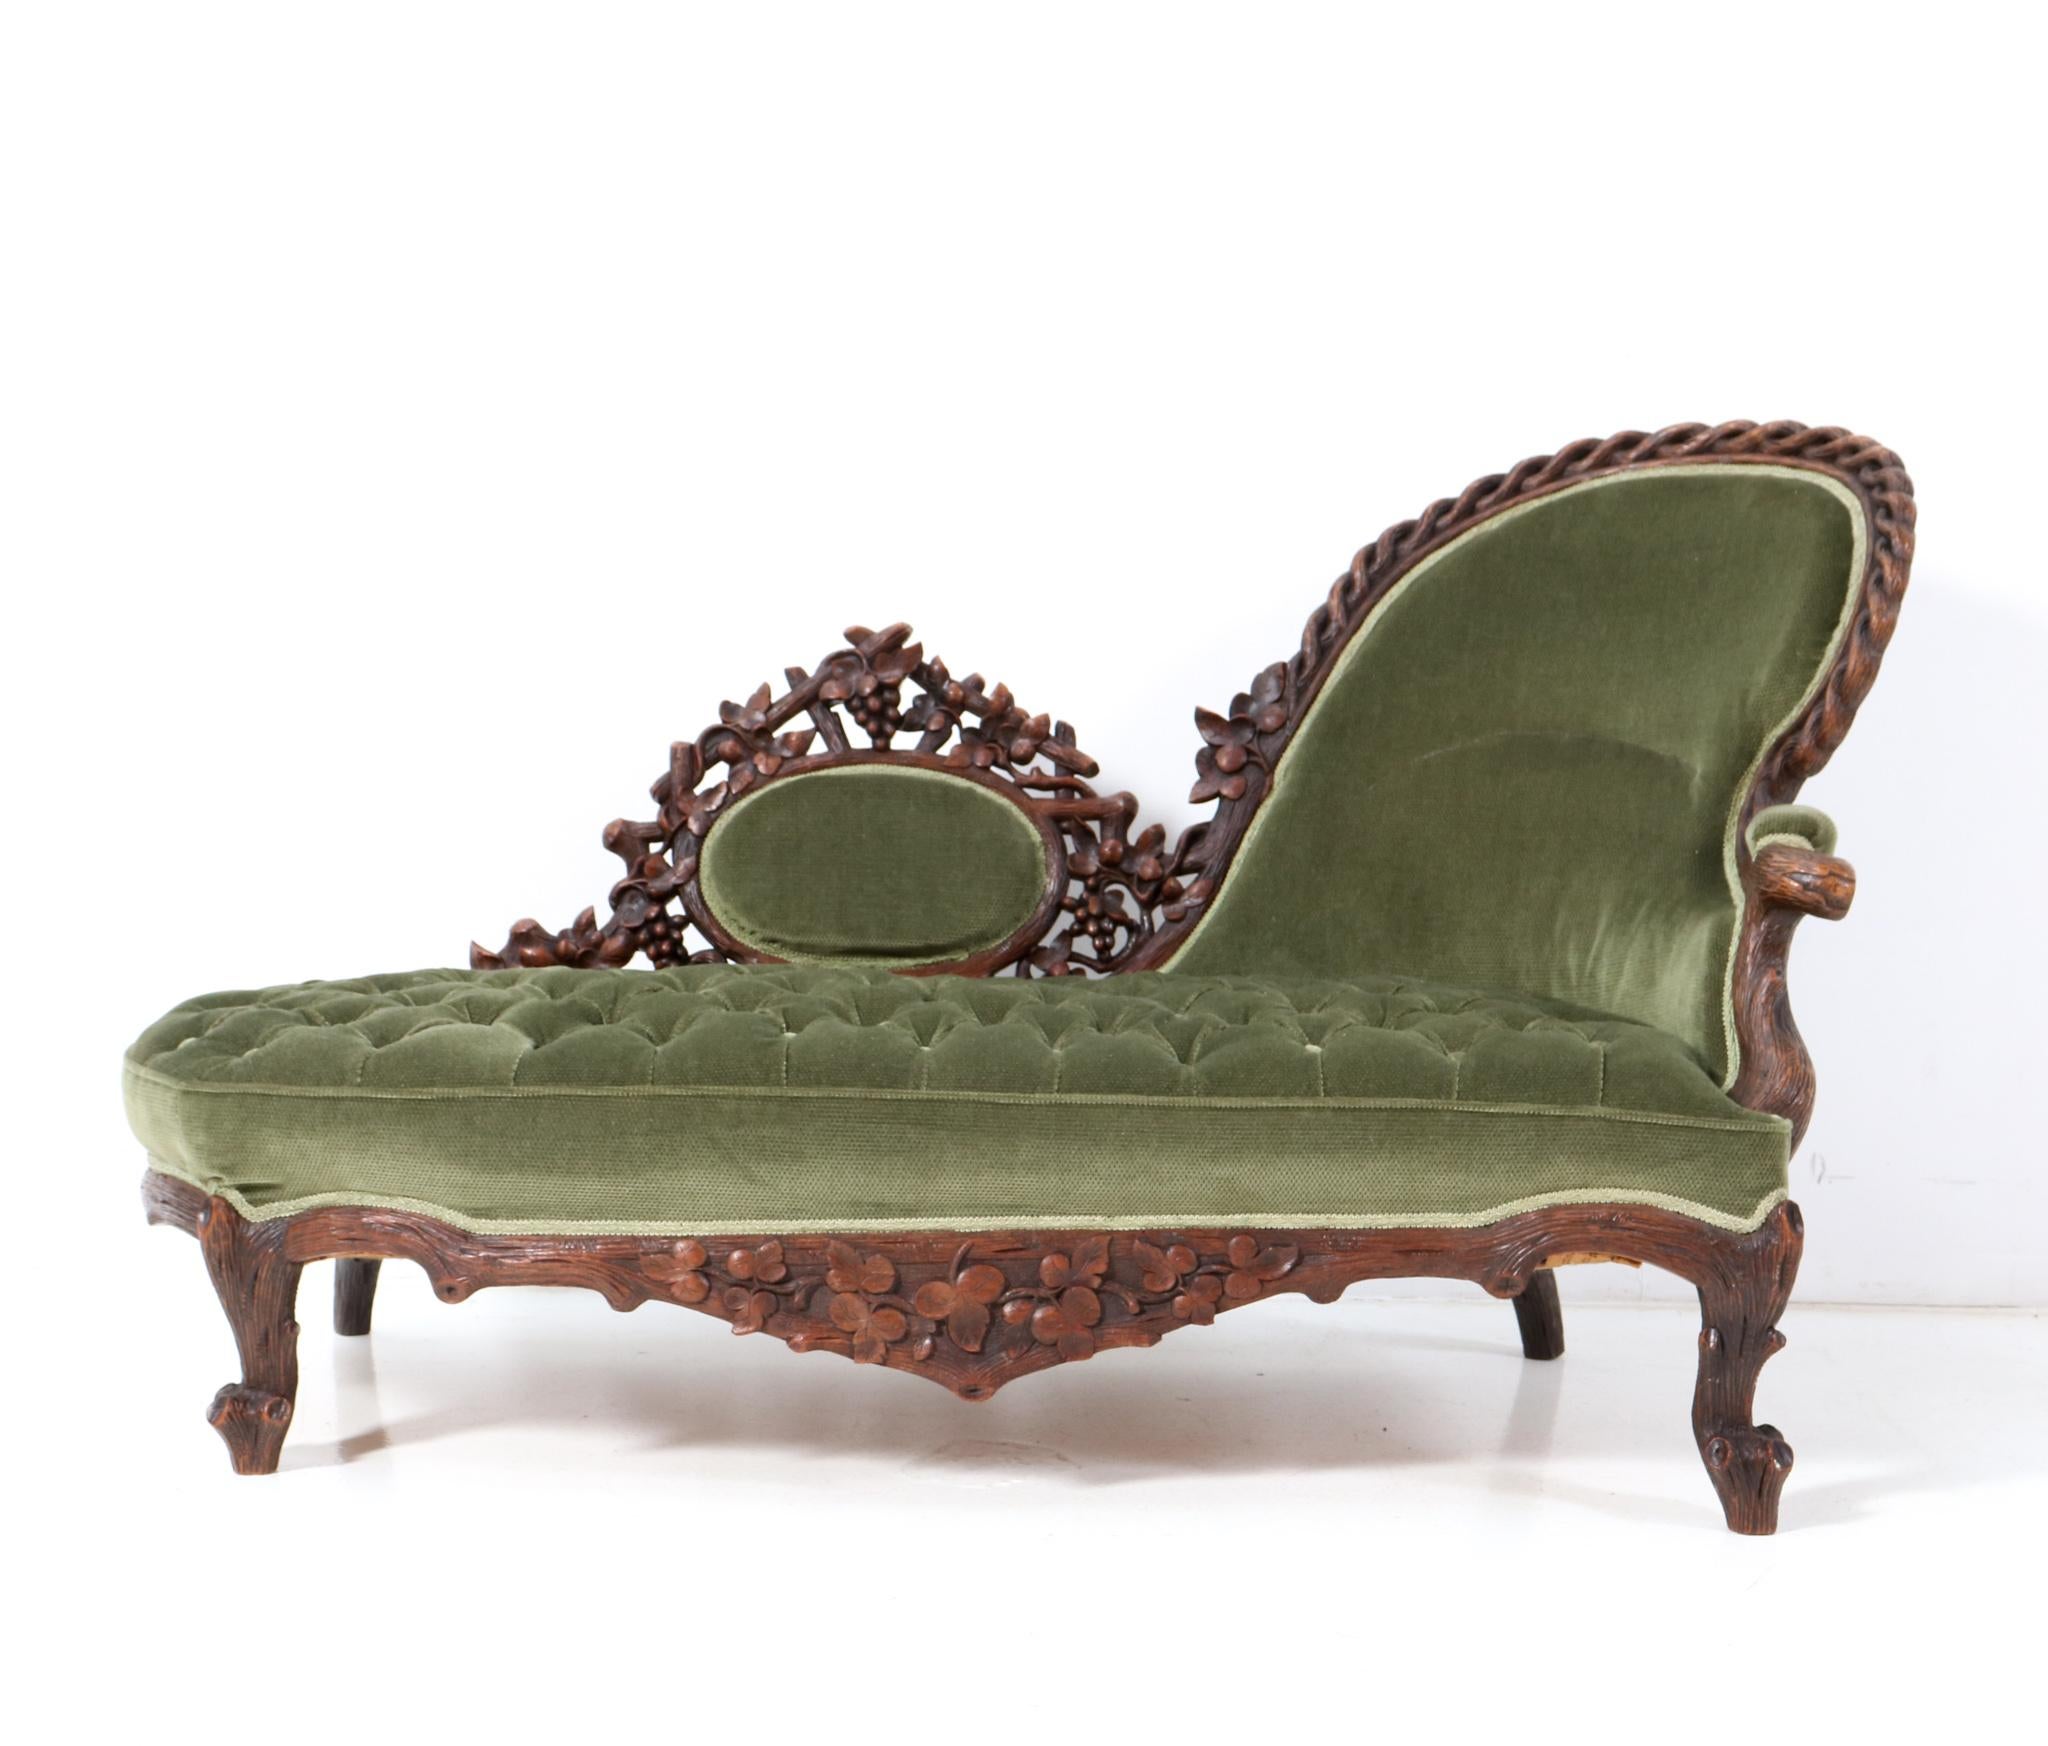 Magnificent and ultra rare Black Forest chaise longue.
Design by Matthijs Horrix for the famous Dutch cabinet makers Horrix Den Haag.
Striking Dutch design from the 1880s.
Solid hand-carved walnut base with green velvet upholstery.
This